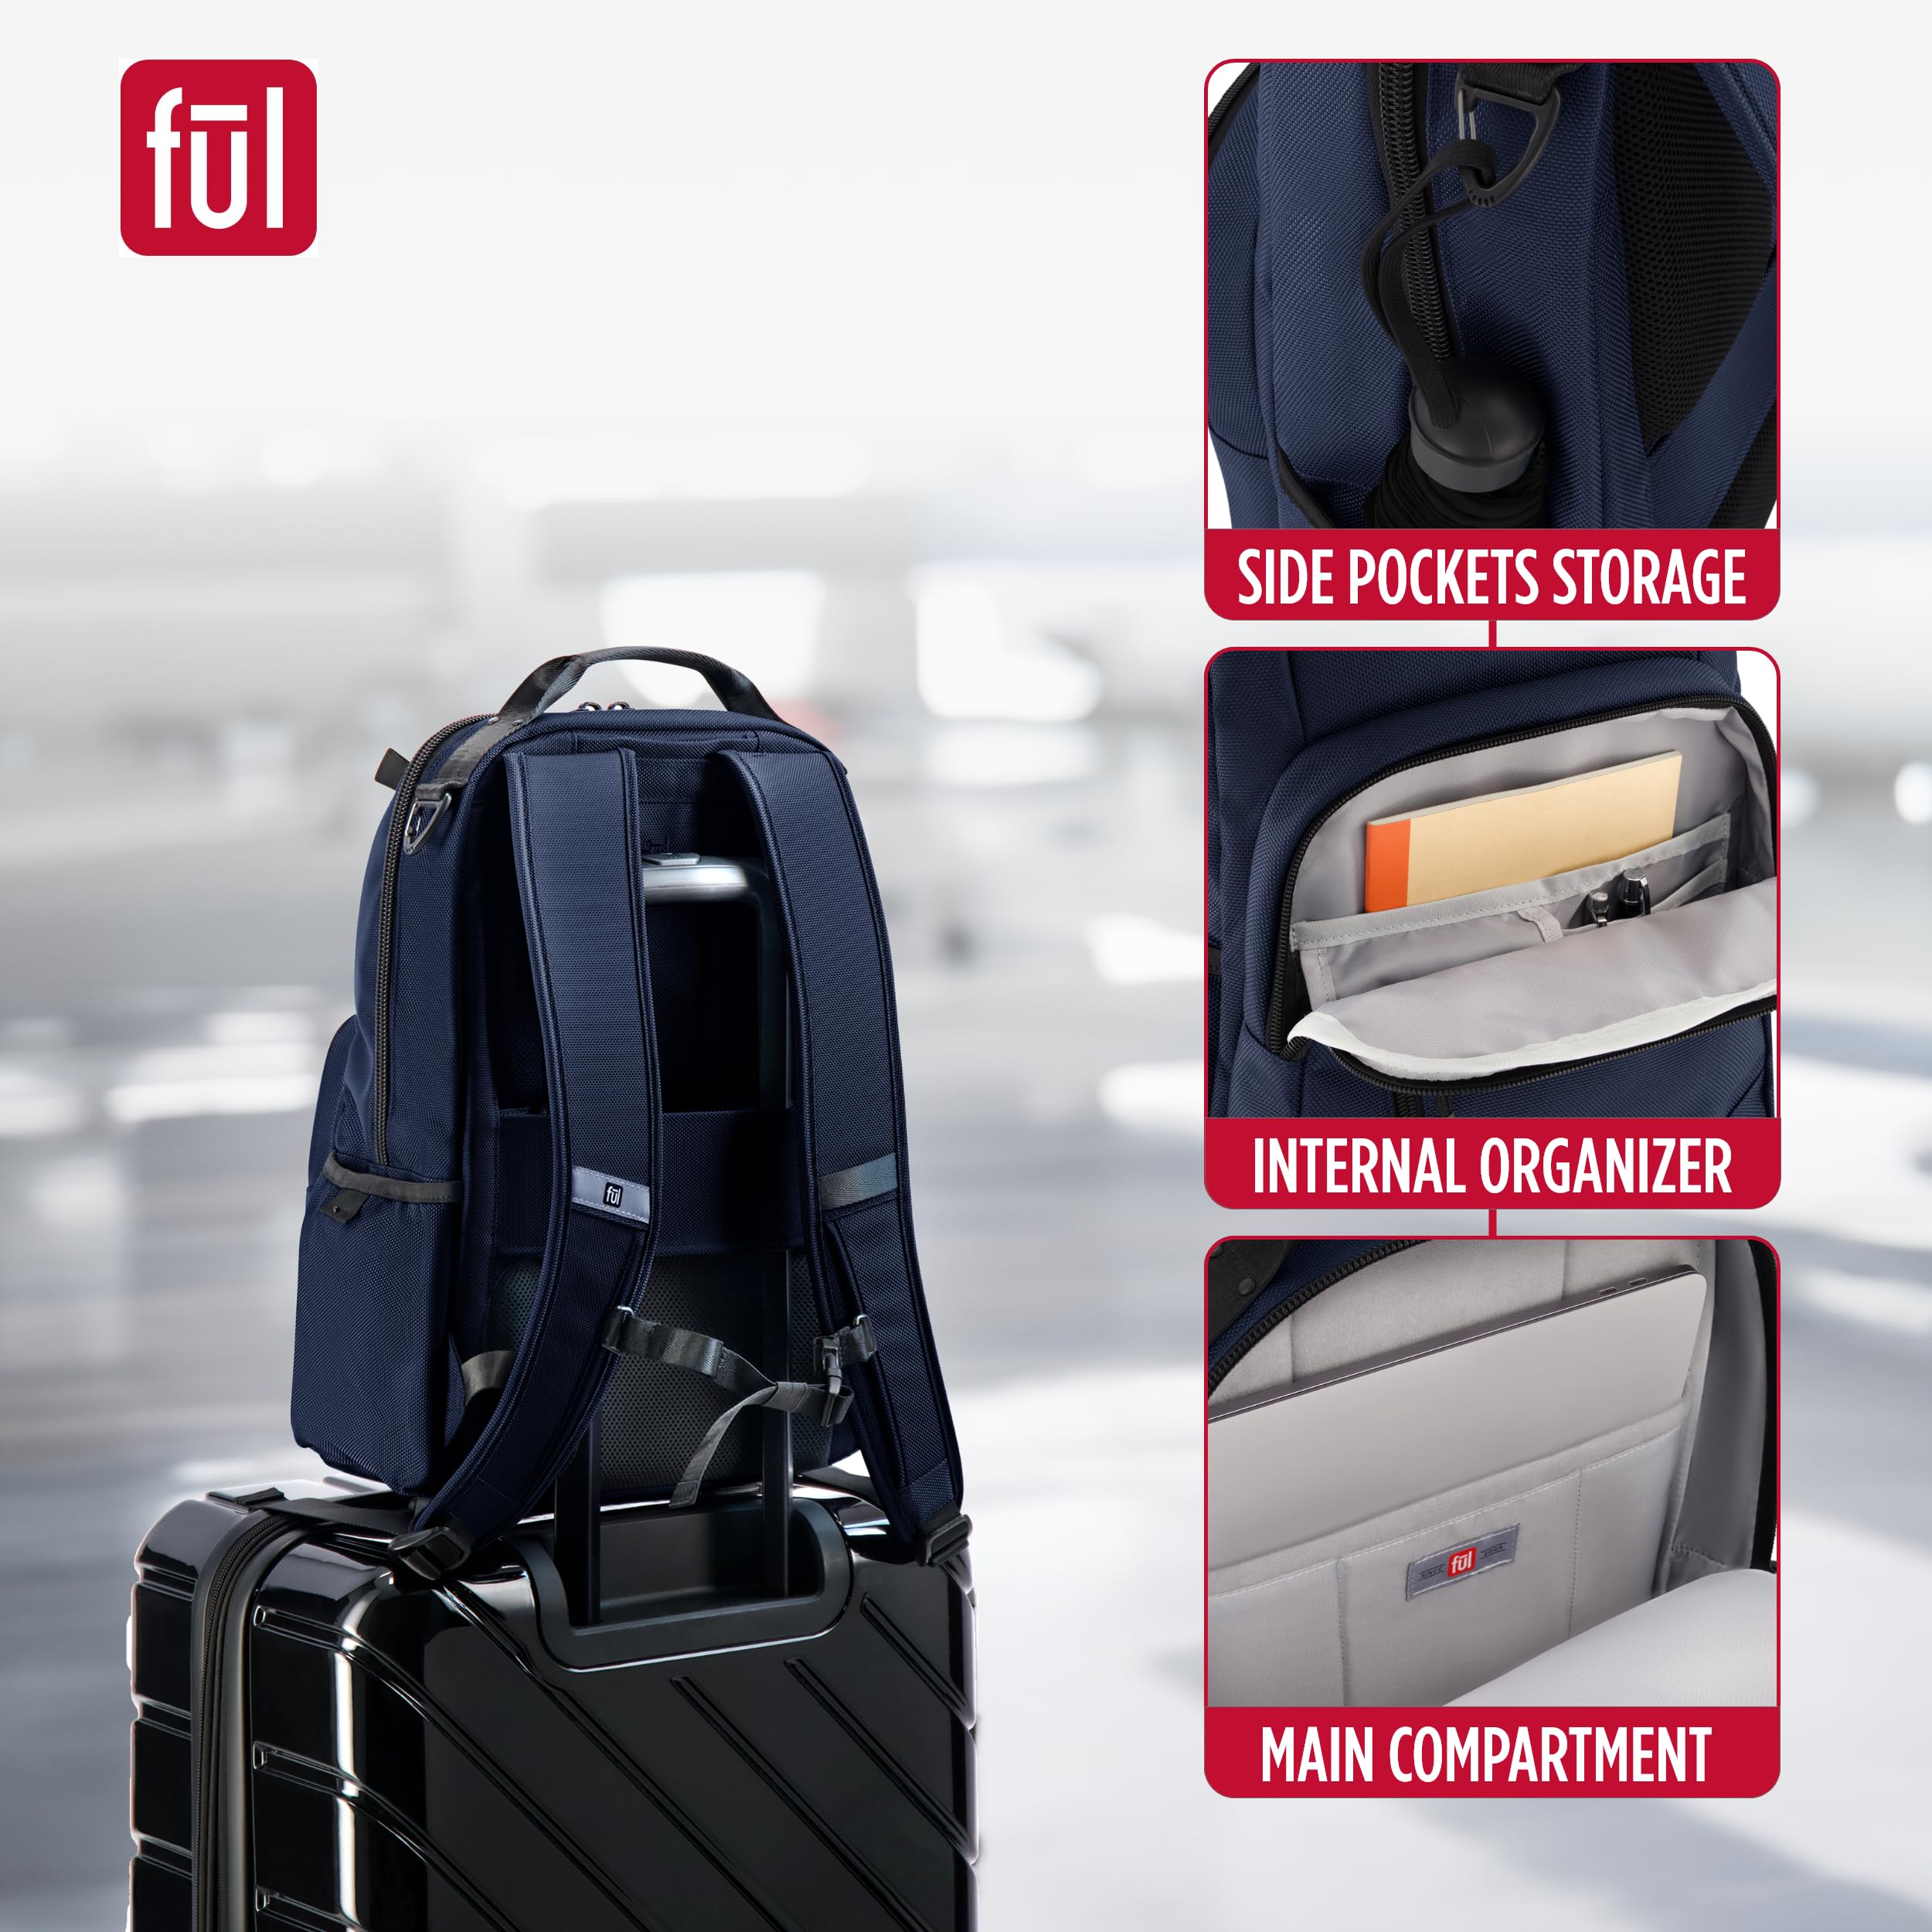 FUL Tactics Collection 15 Inch Laptop Backpack, Phantom Padded Computer Bag for Commute or Travel, Navy